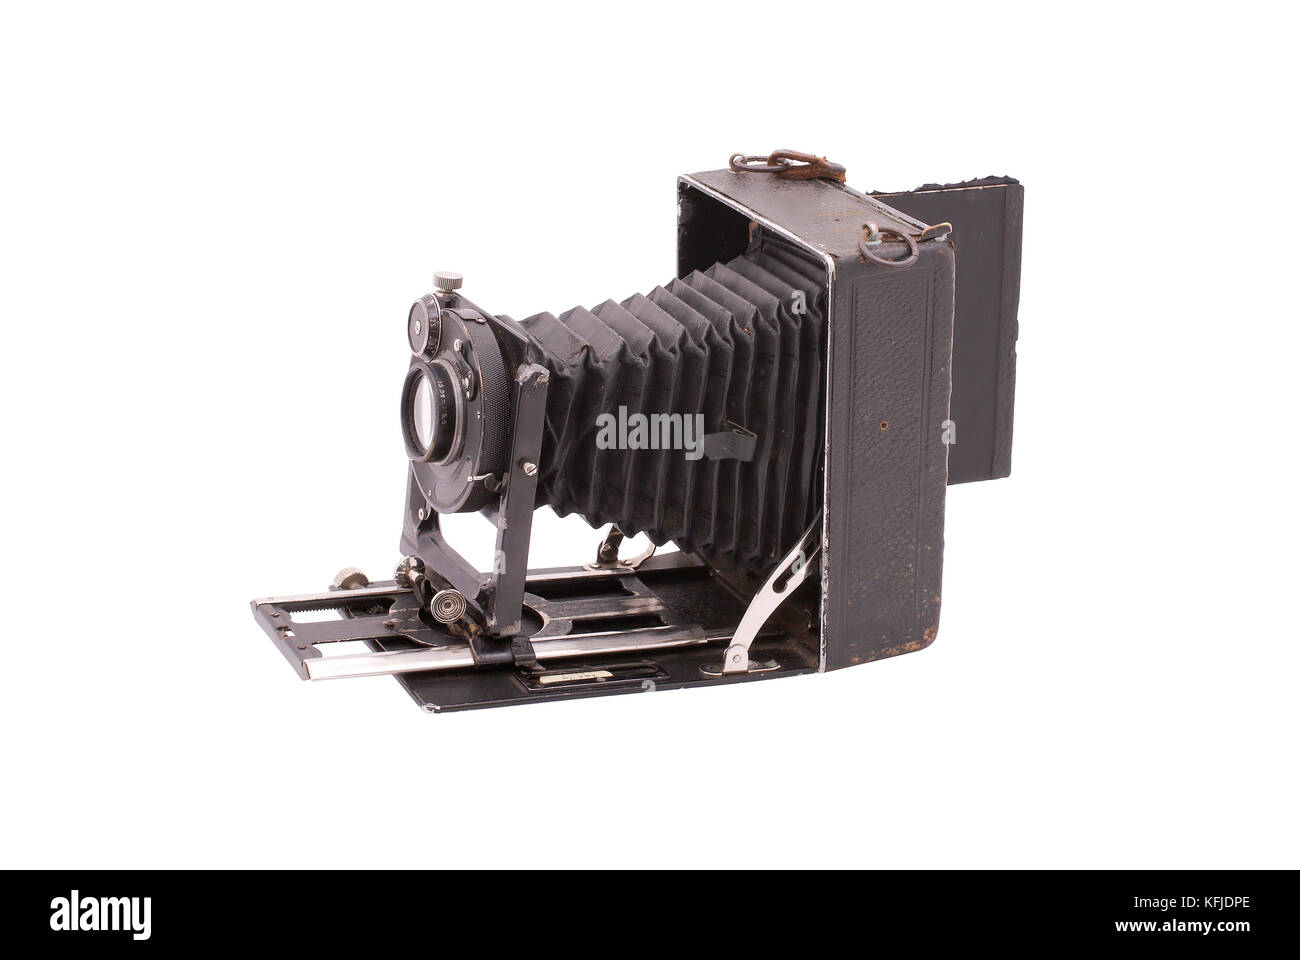 German old camera. The beggining of the 20th century. Path on white background. Stock Photo